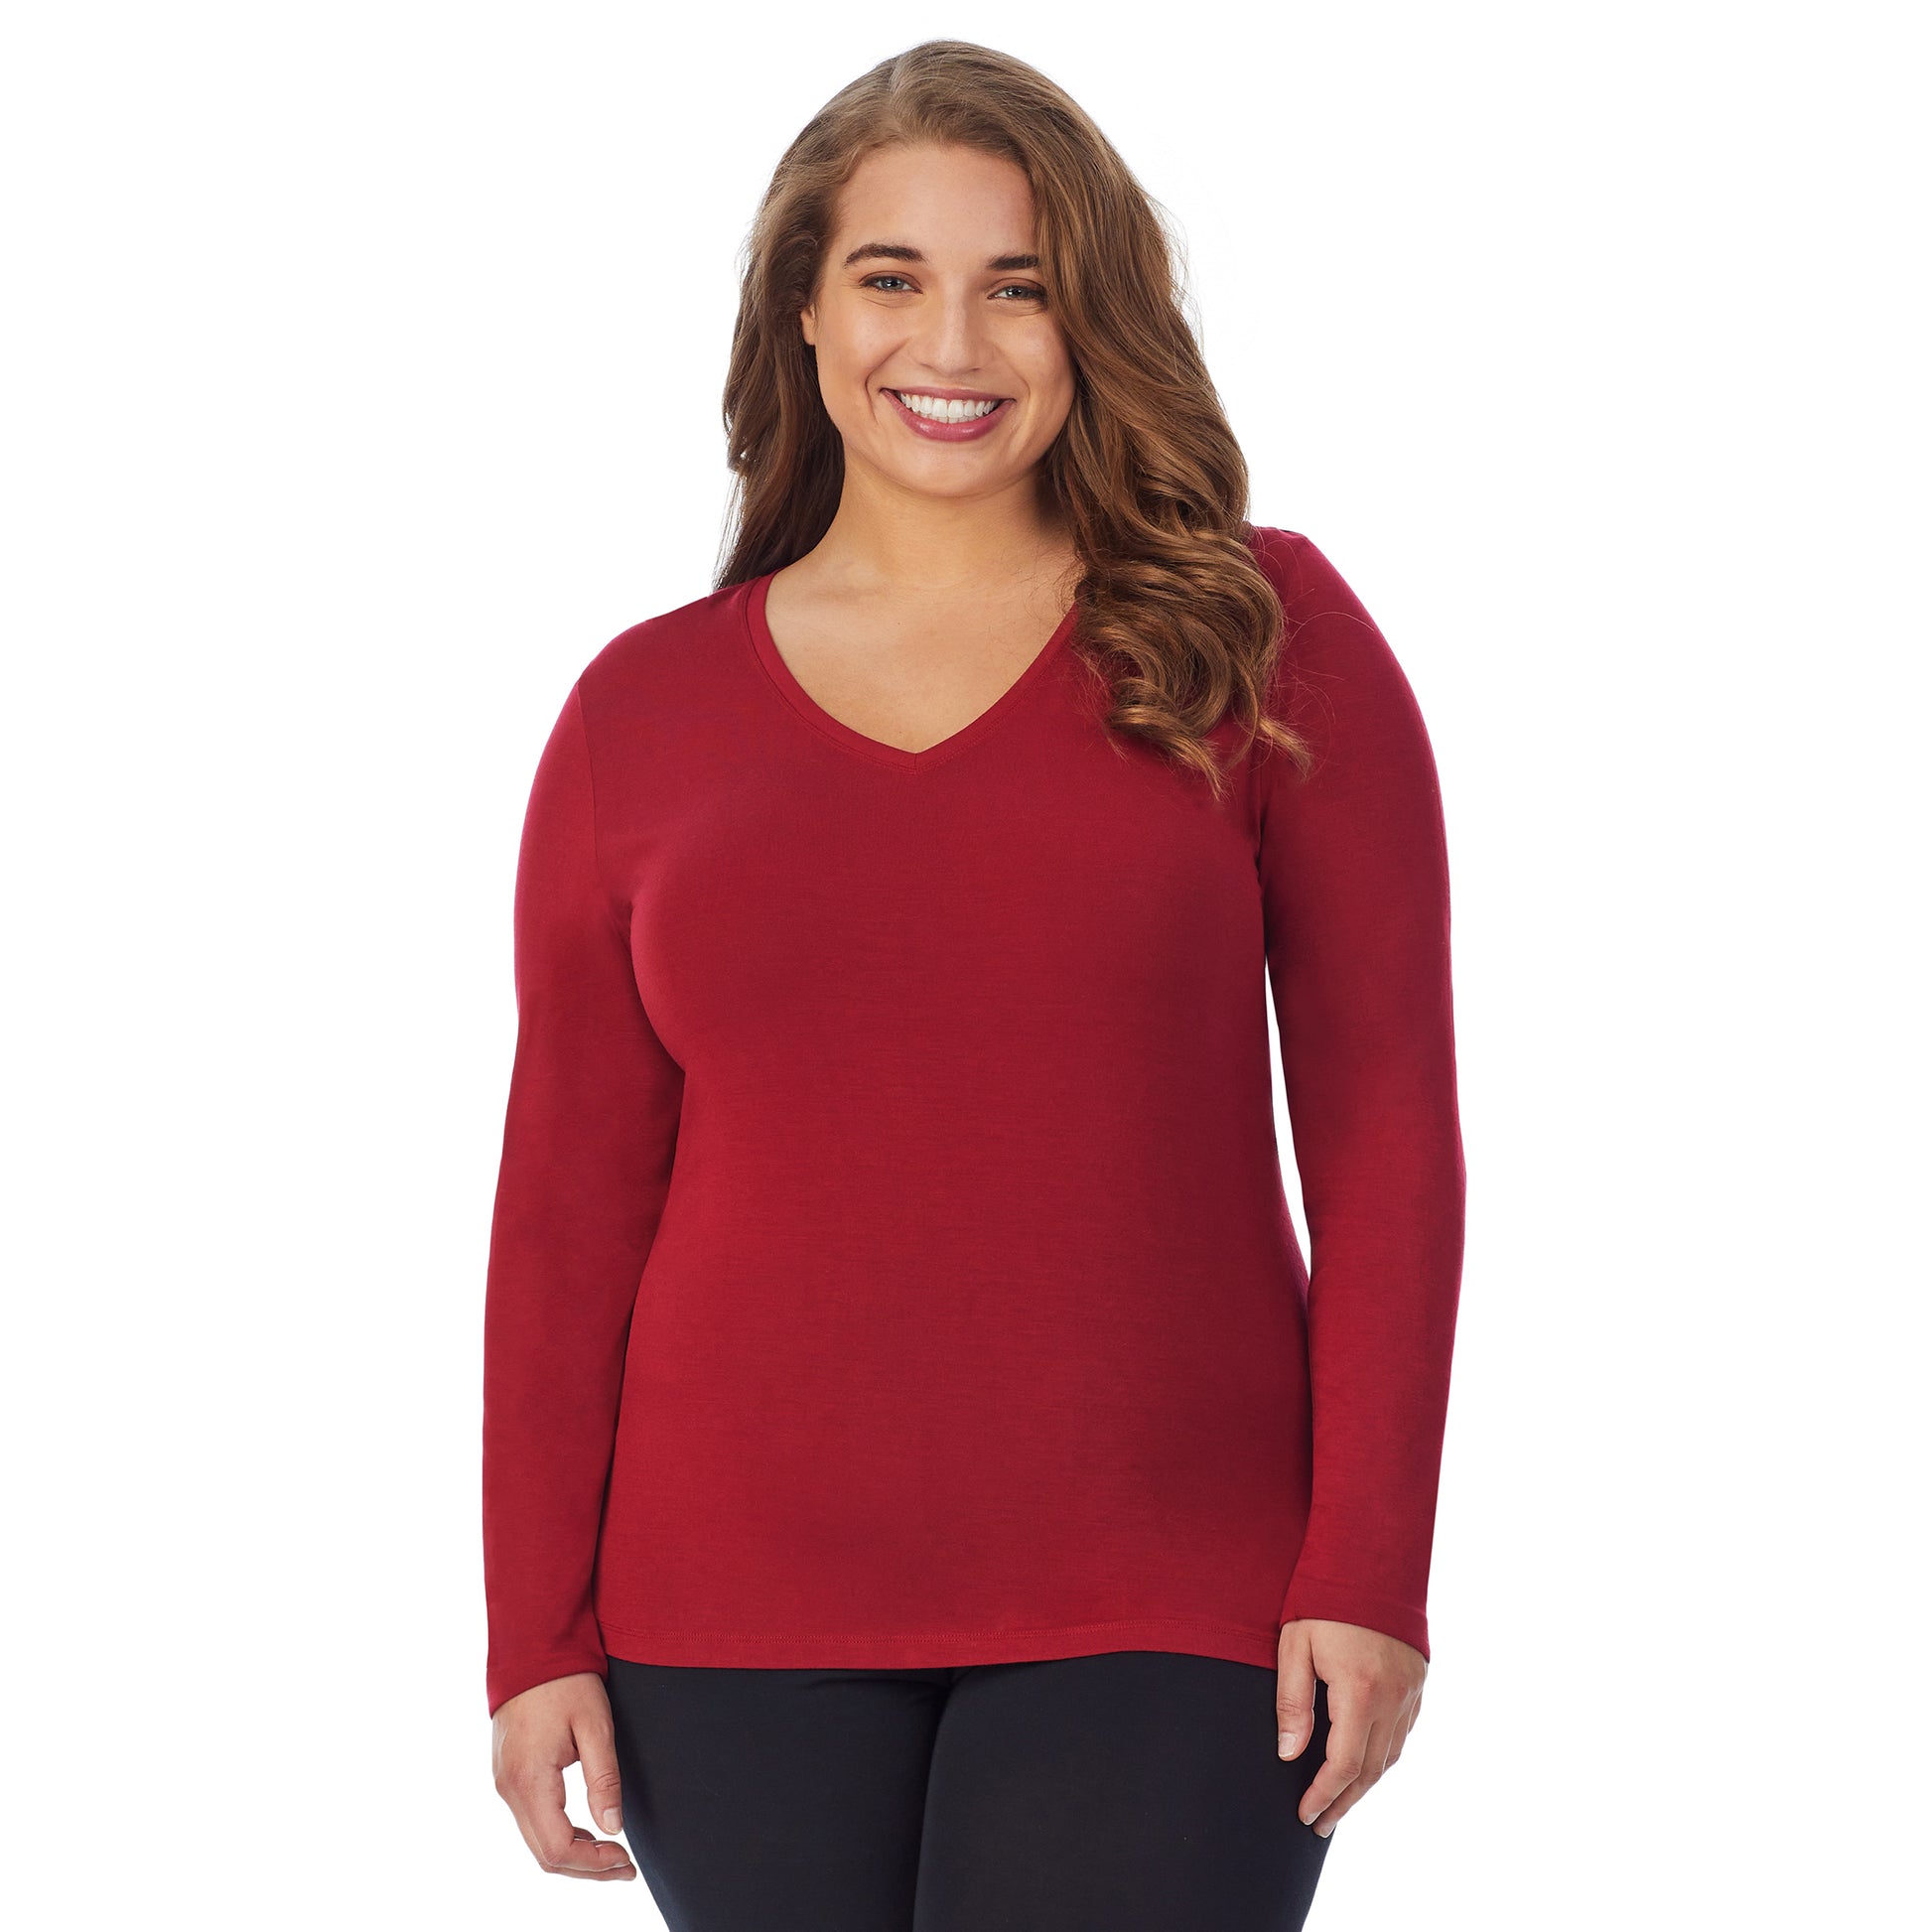  Rhubarb; Model is wearing size 1X. She is 5'7", Bust 42.5", Waist 34.5", Hips 46".@upper body of a lady wearing red long sleeve v-neck top